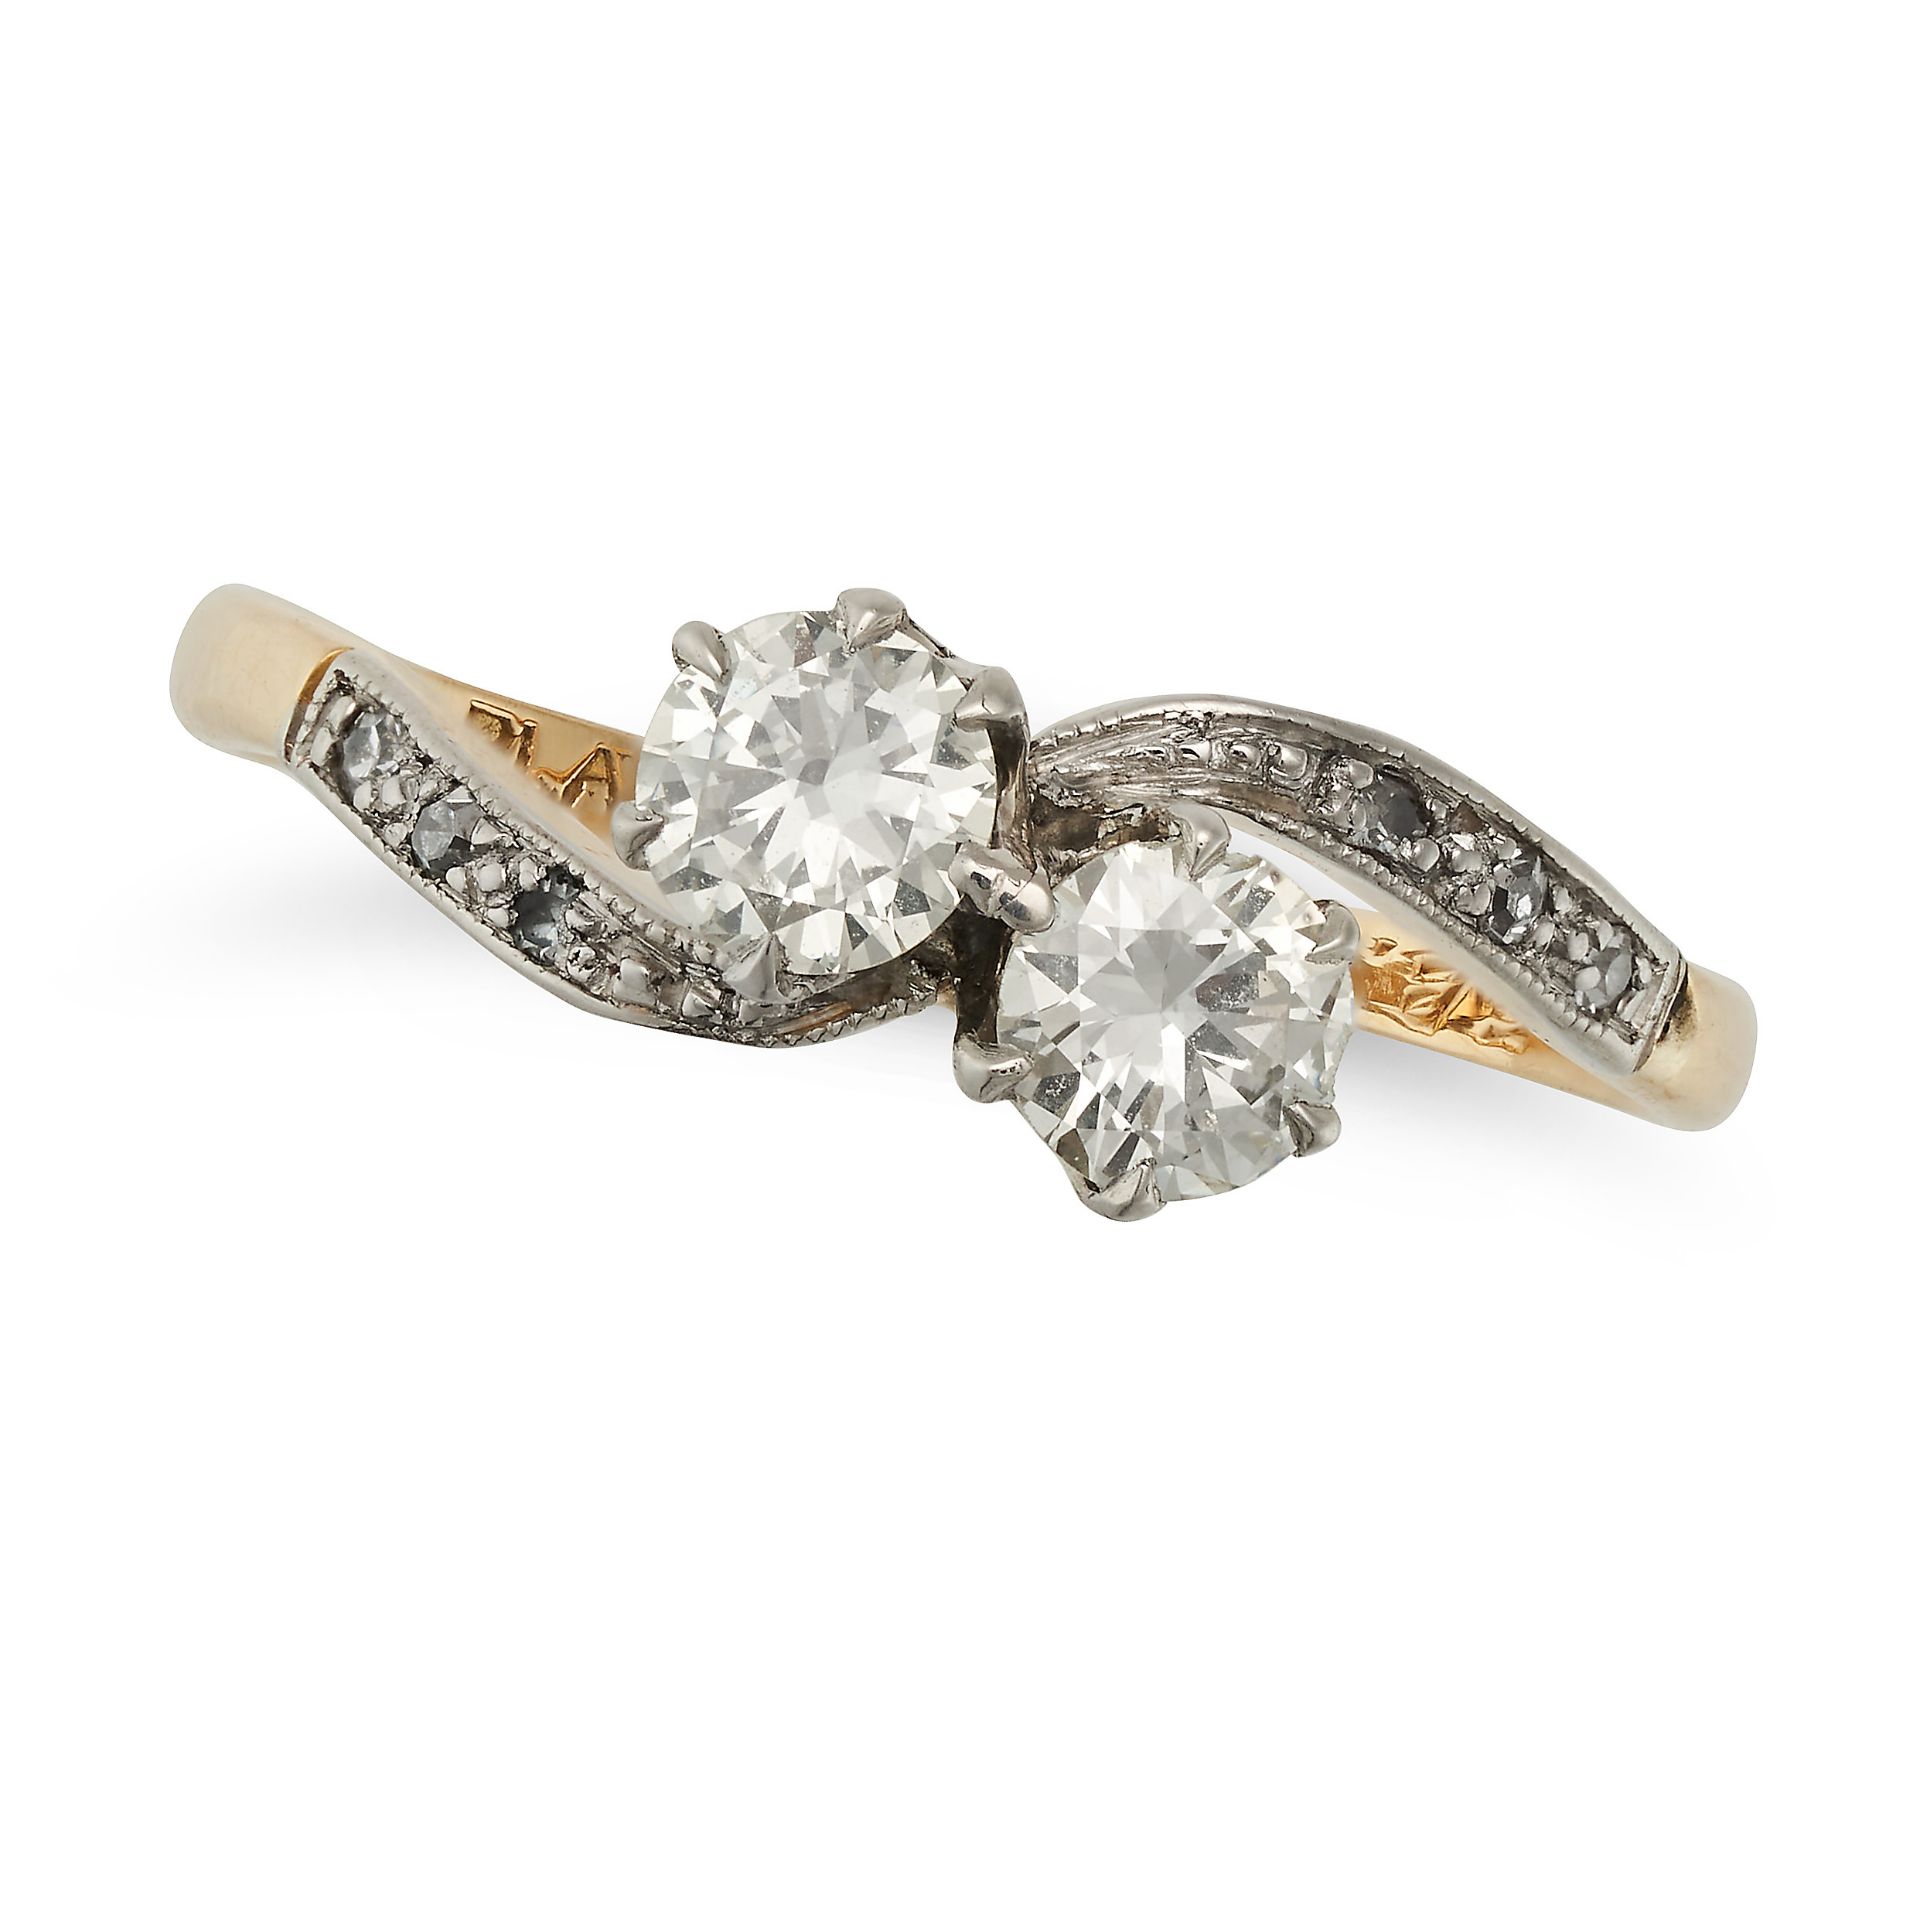 A DIAMOND TOI ET MOI RING in 18ct yellow gold and platinum, set with two round brilliant cut diam...